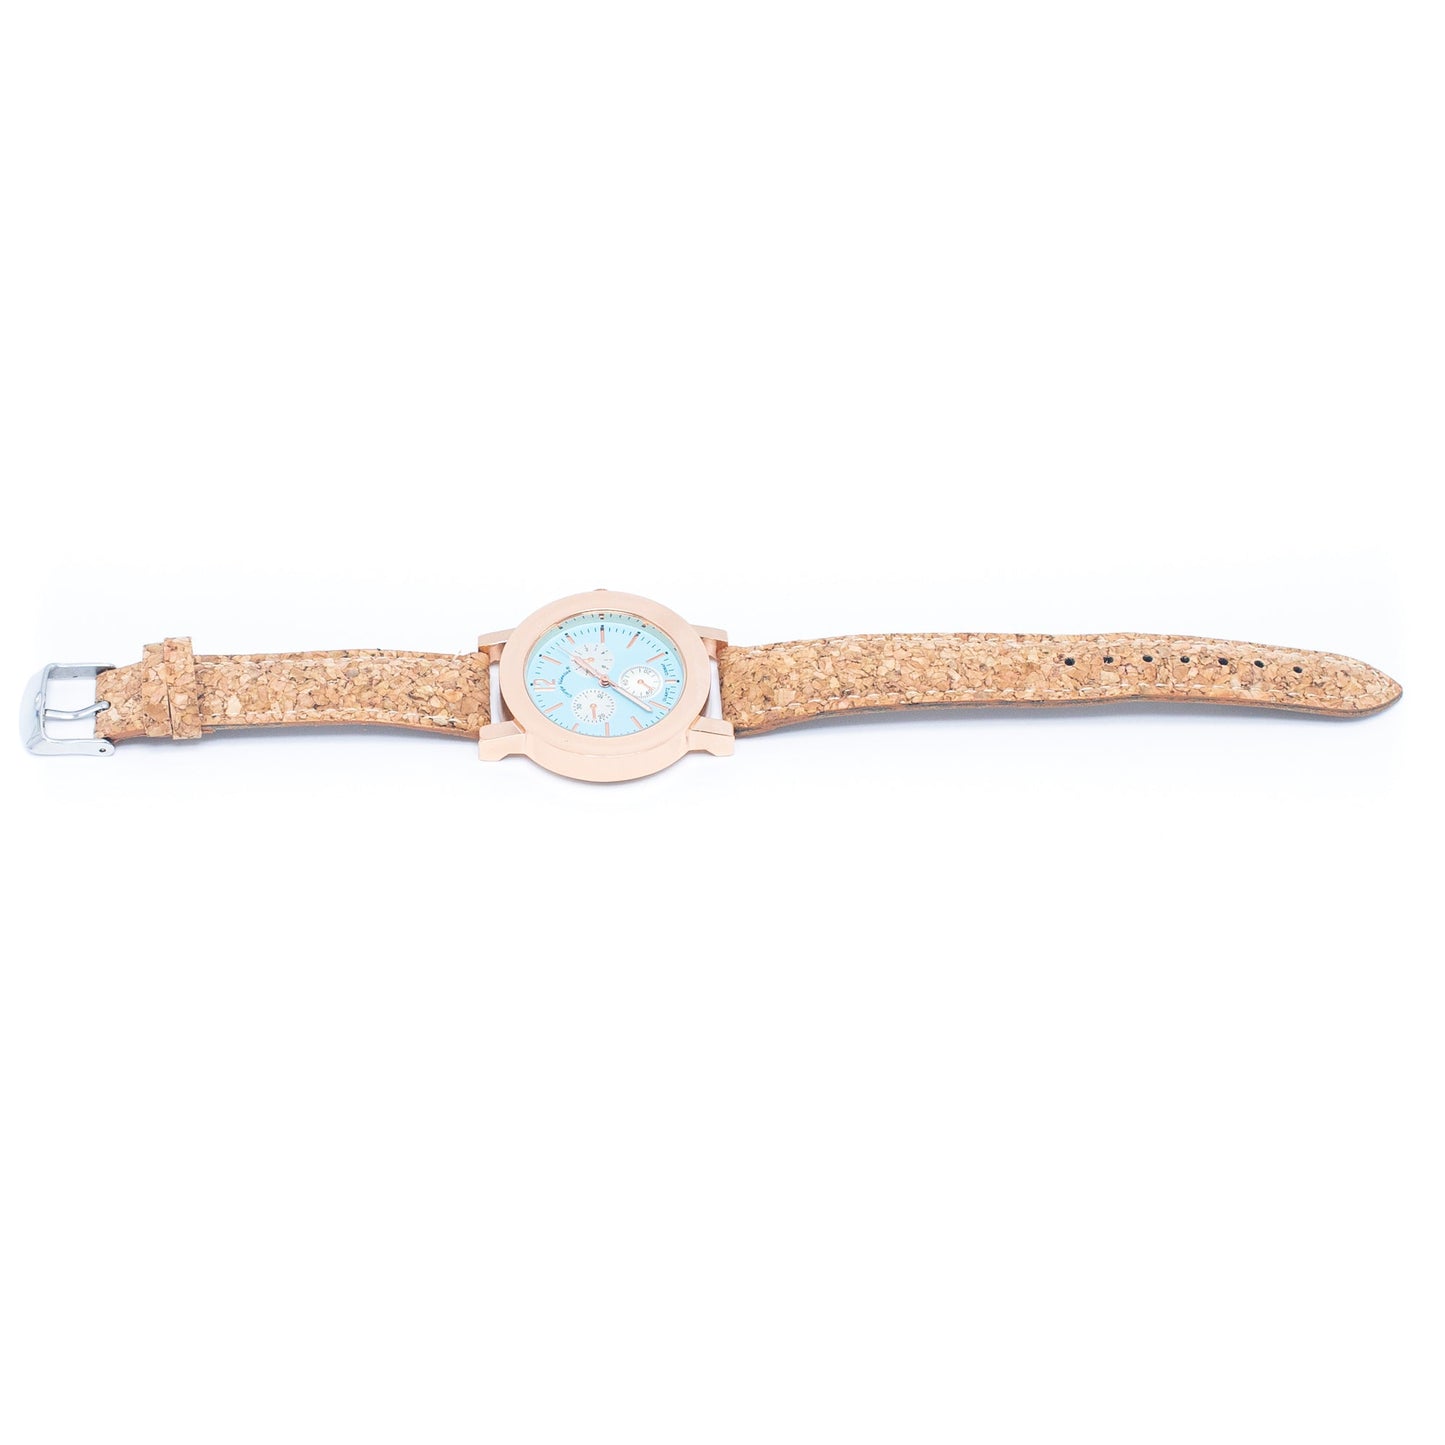 Stylish Casual Watch w/ Natural Cork Watch Strap | THE CORK COLLECTION